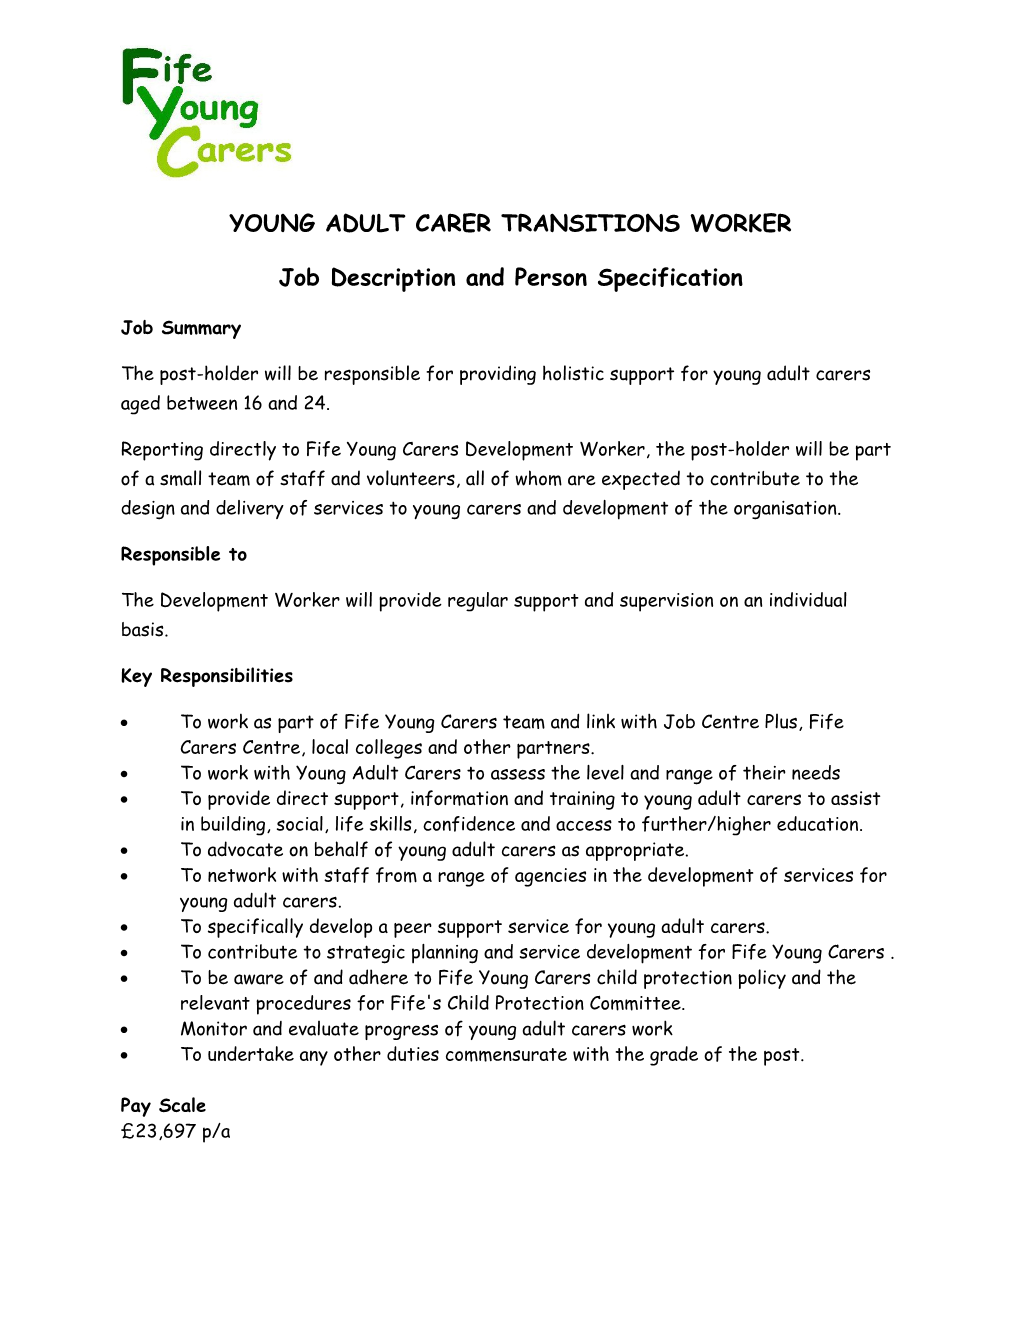 Young Adult Carer Transitions Worker